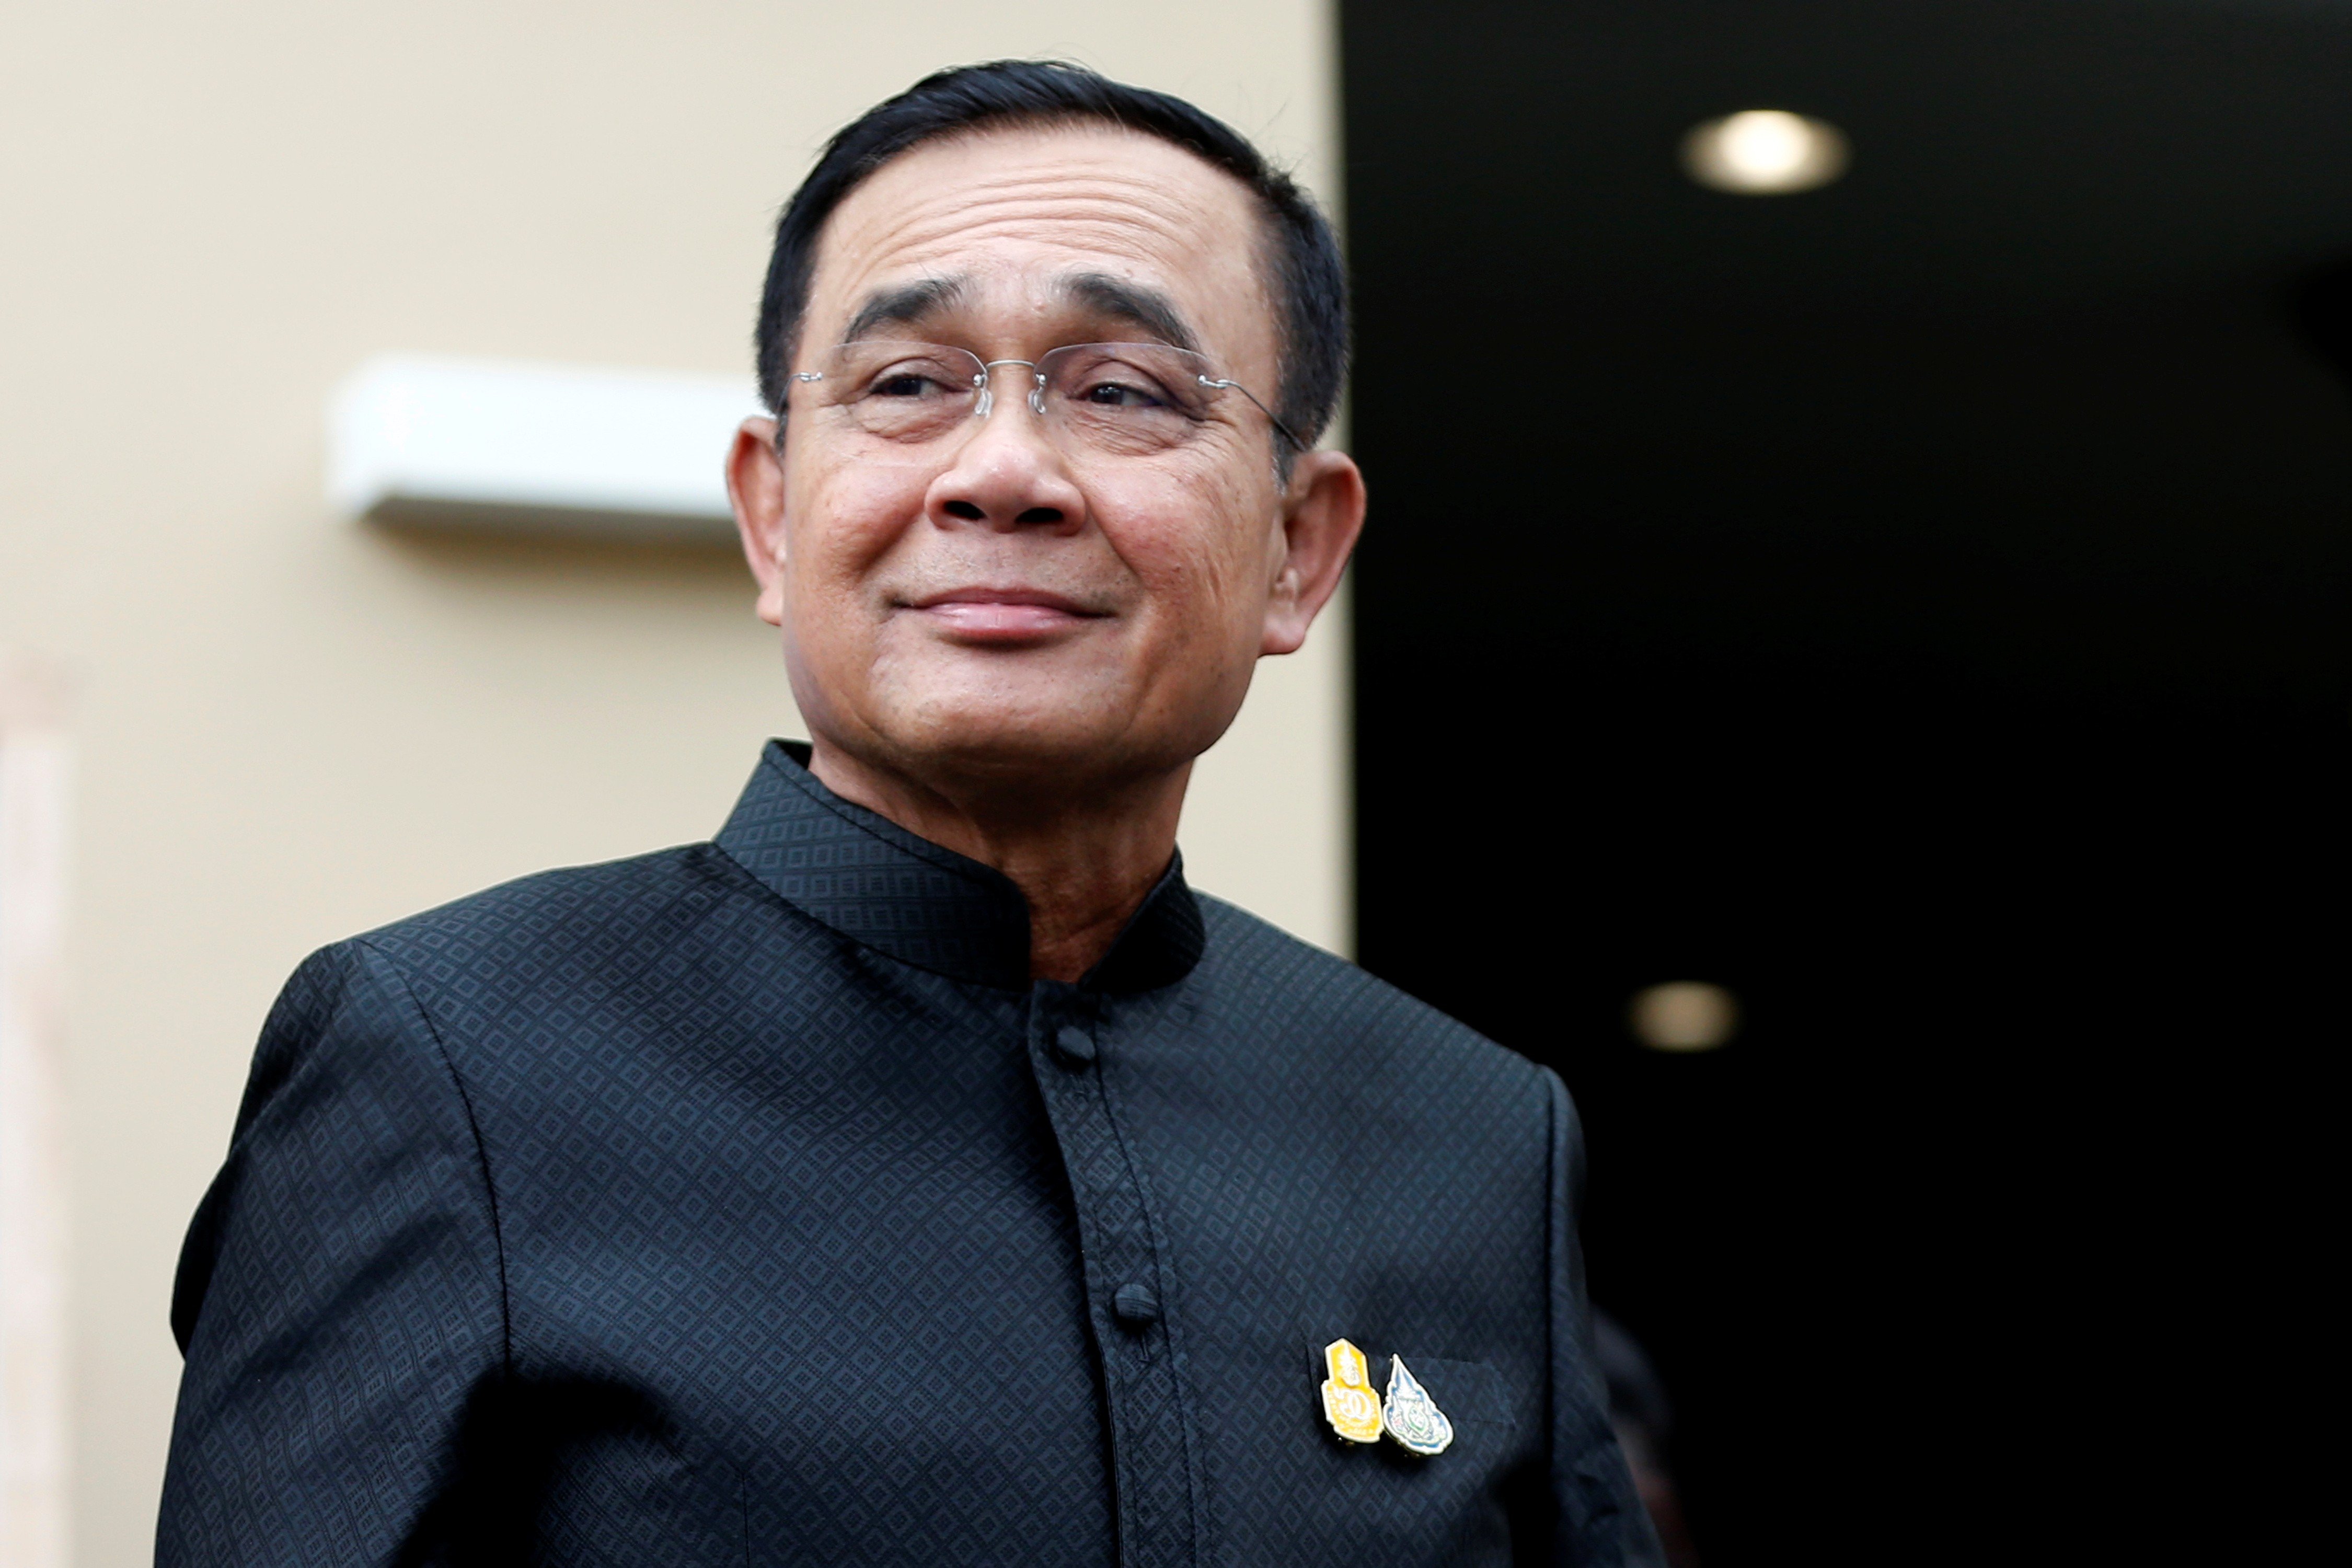 Thailand's Prime Minister Prayuth Chan-ocha arrives at the weekly cabinet meeting at Government House in Bangkok in May. Photo: Reuters